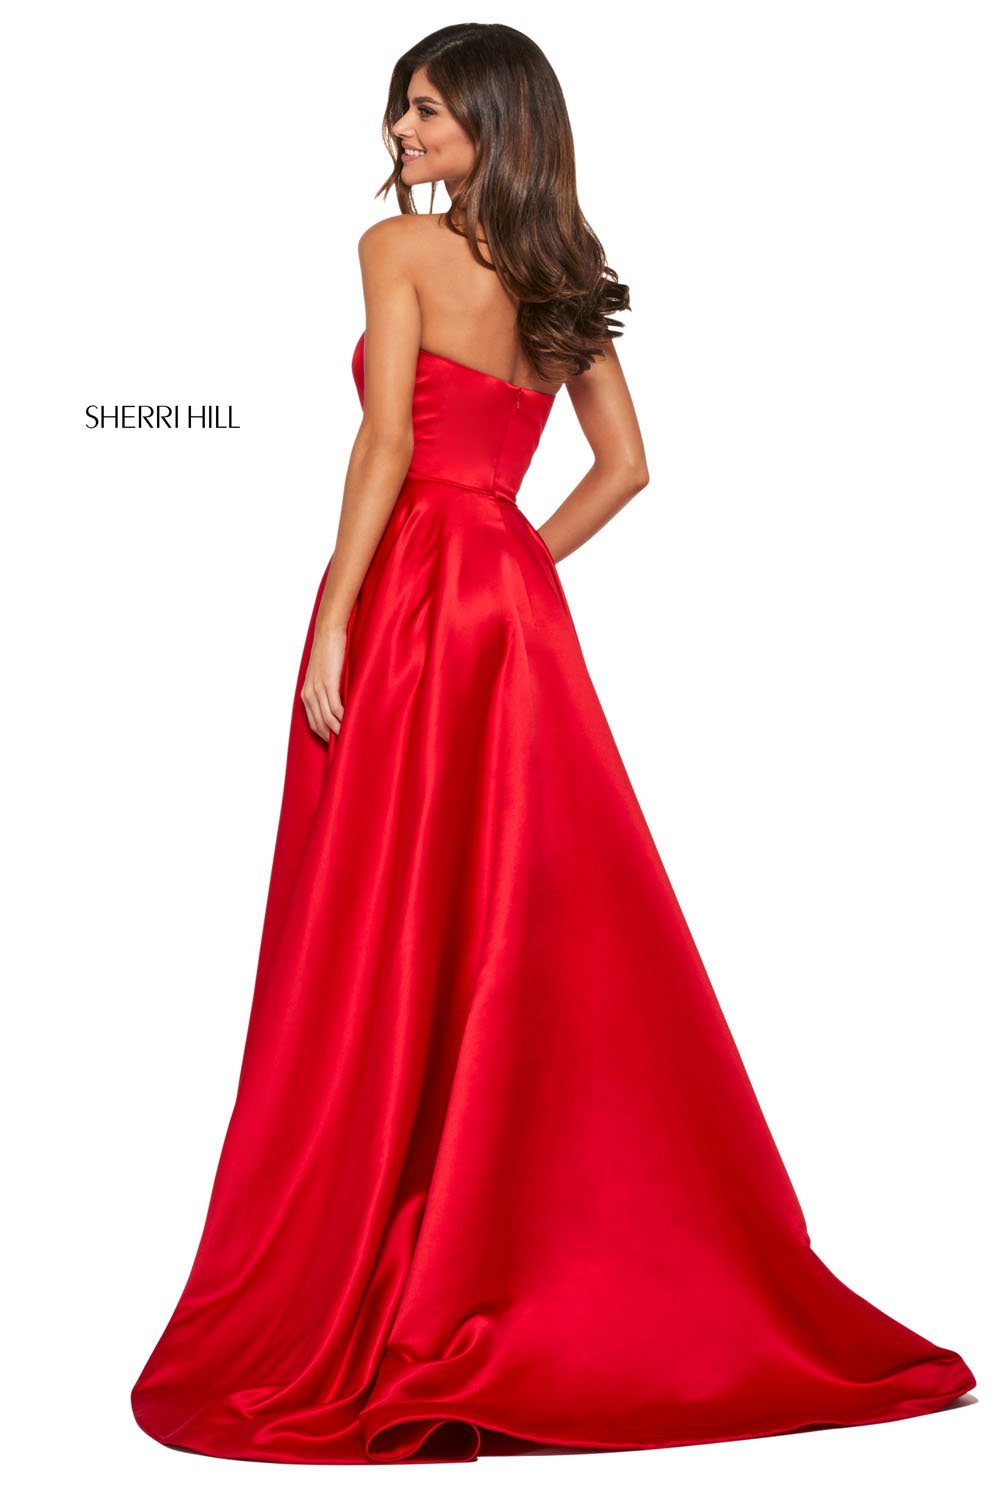 Sherri Hill 53307 dress images in these colors: Emerald, Royal, Black, Red, Light Blue, Ivory, Lilac, Candy Pink, Navy, Coral, Aqua, Rose, Yellow.